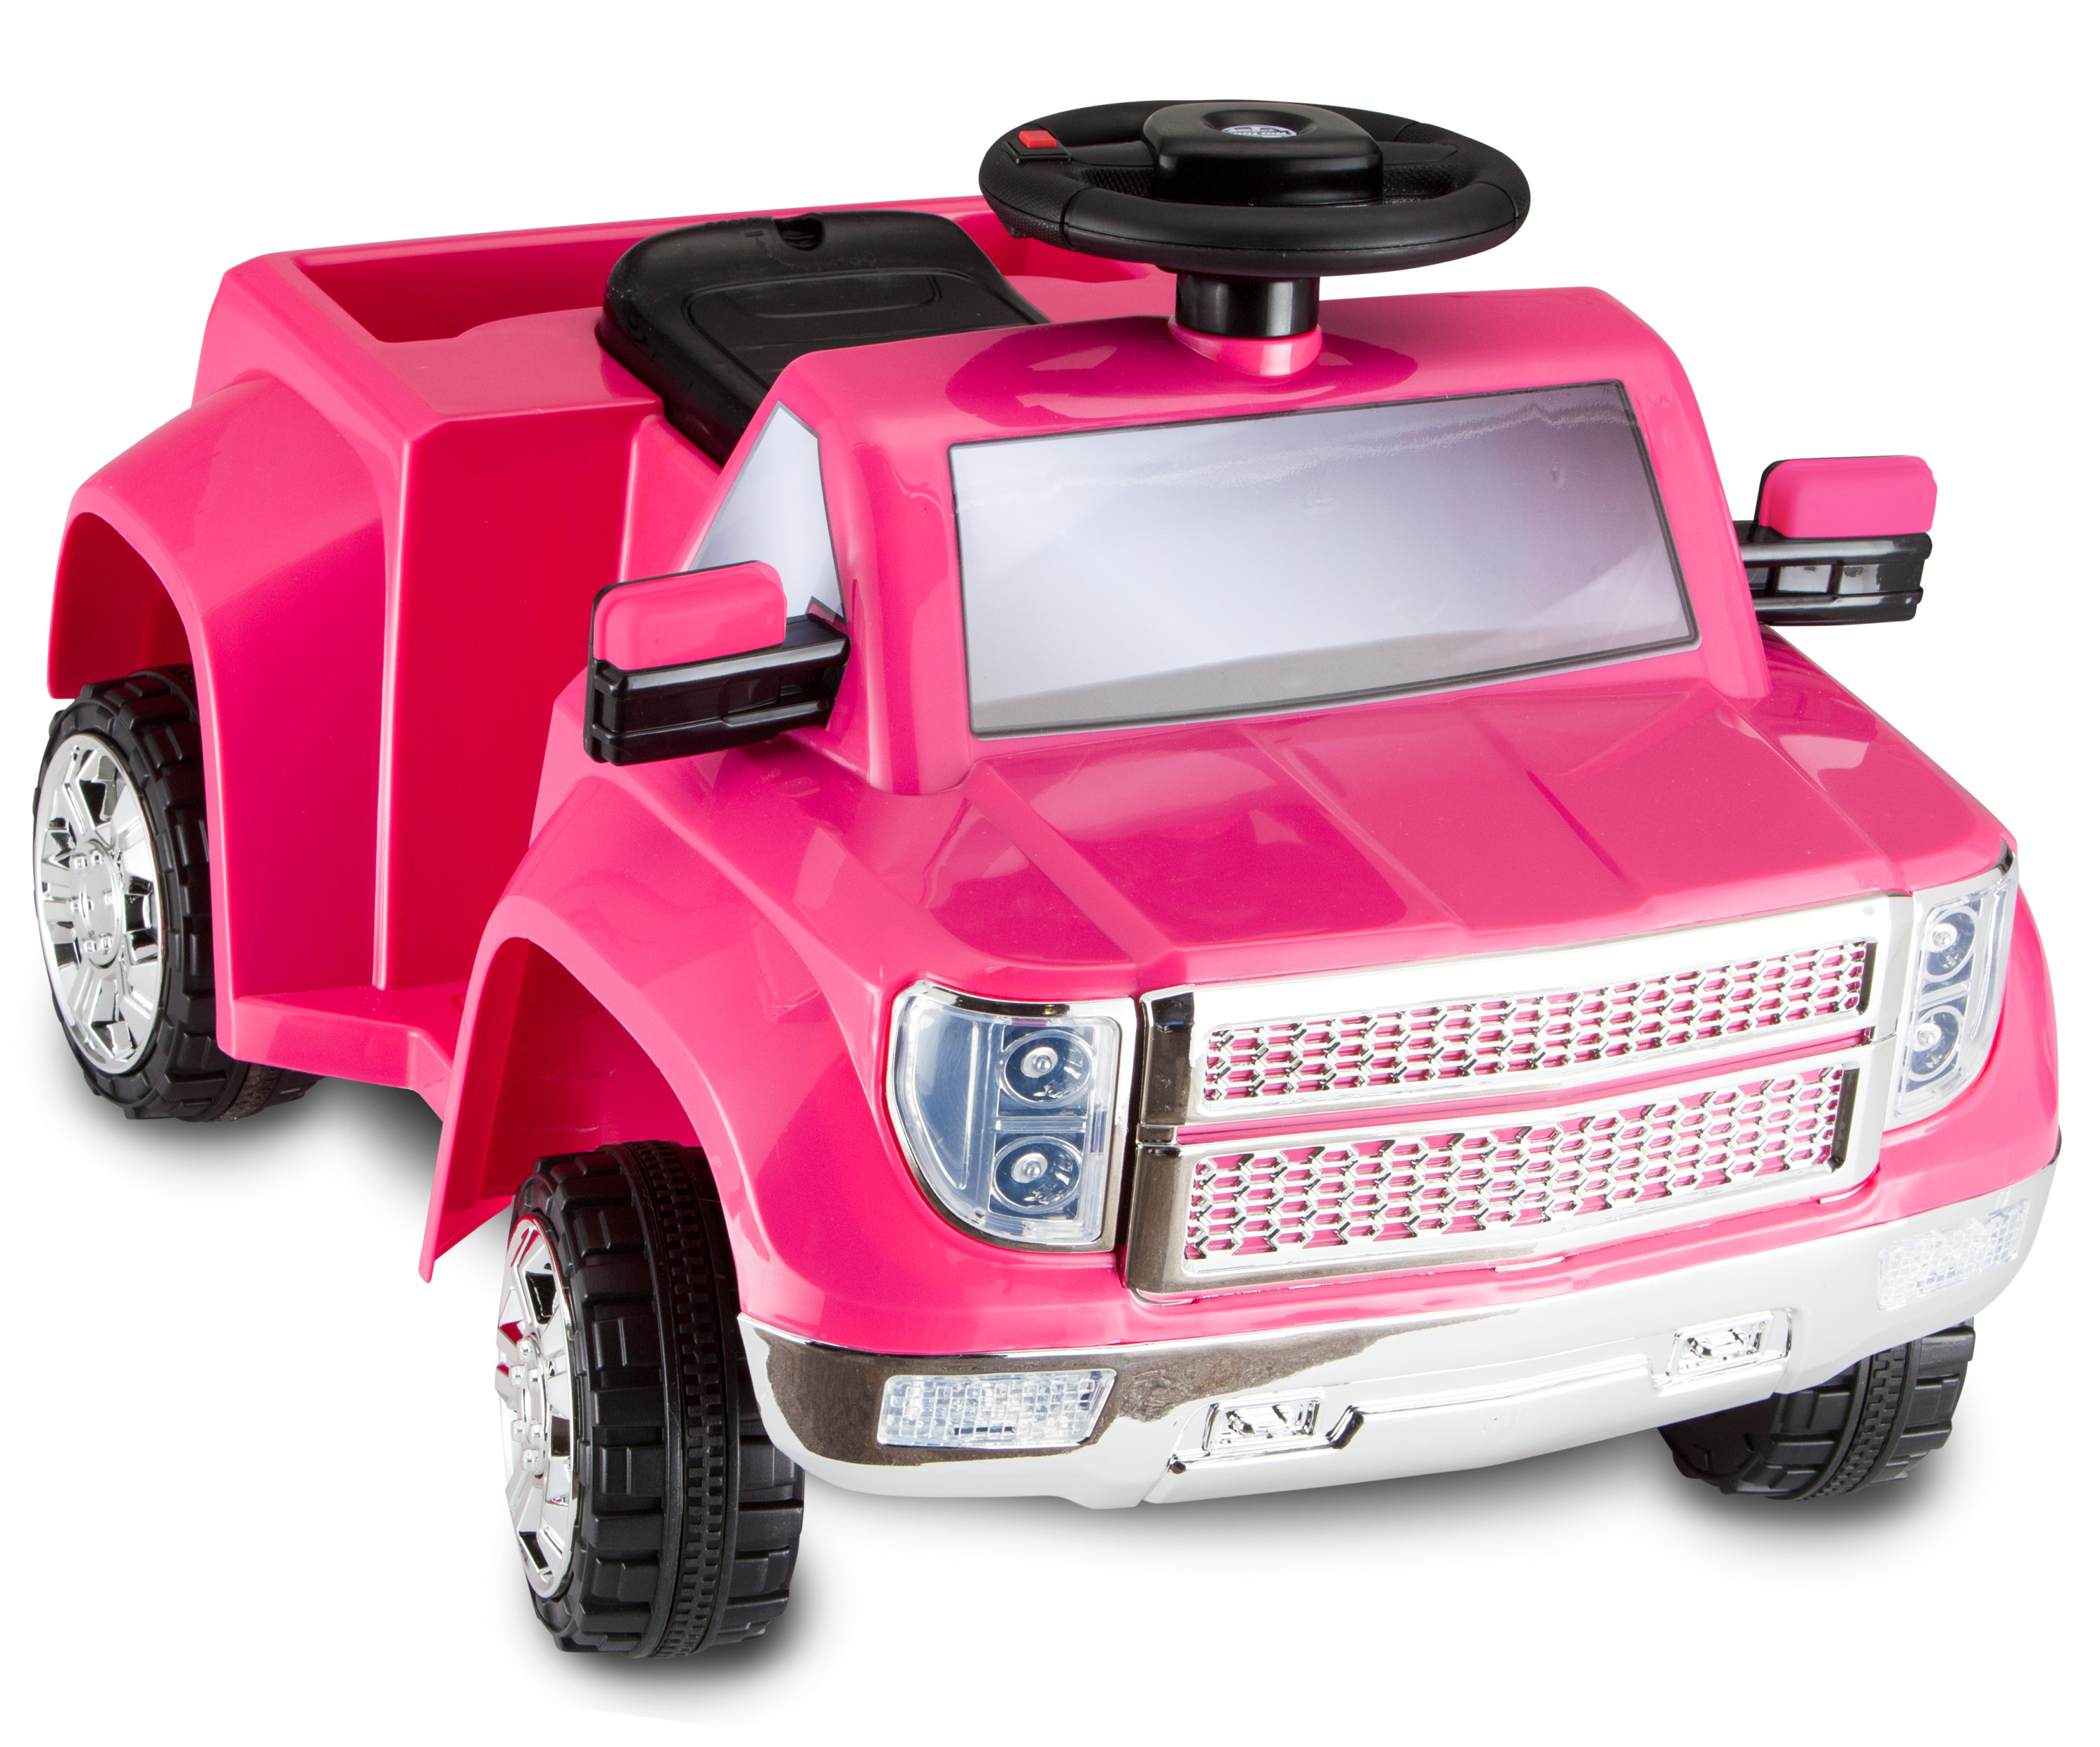 Heavy Hauling Truck with Trailer Toddler Ride-On Toy by Kid Trax, pink - image 5 of 8